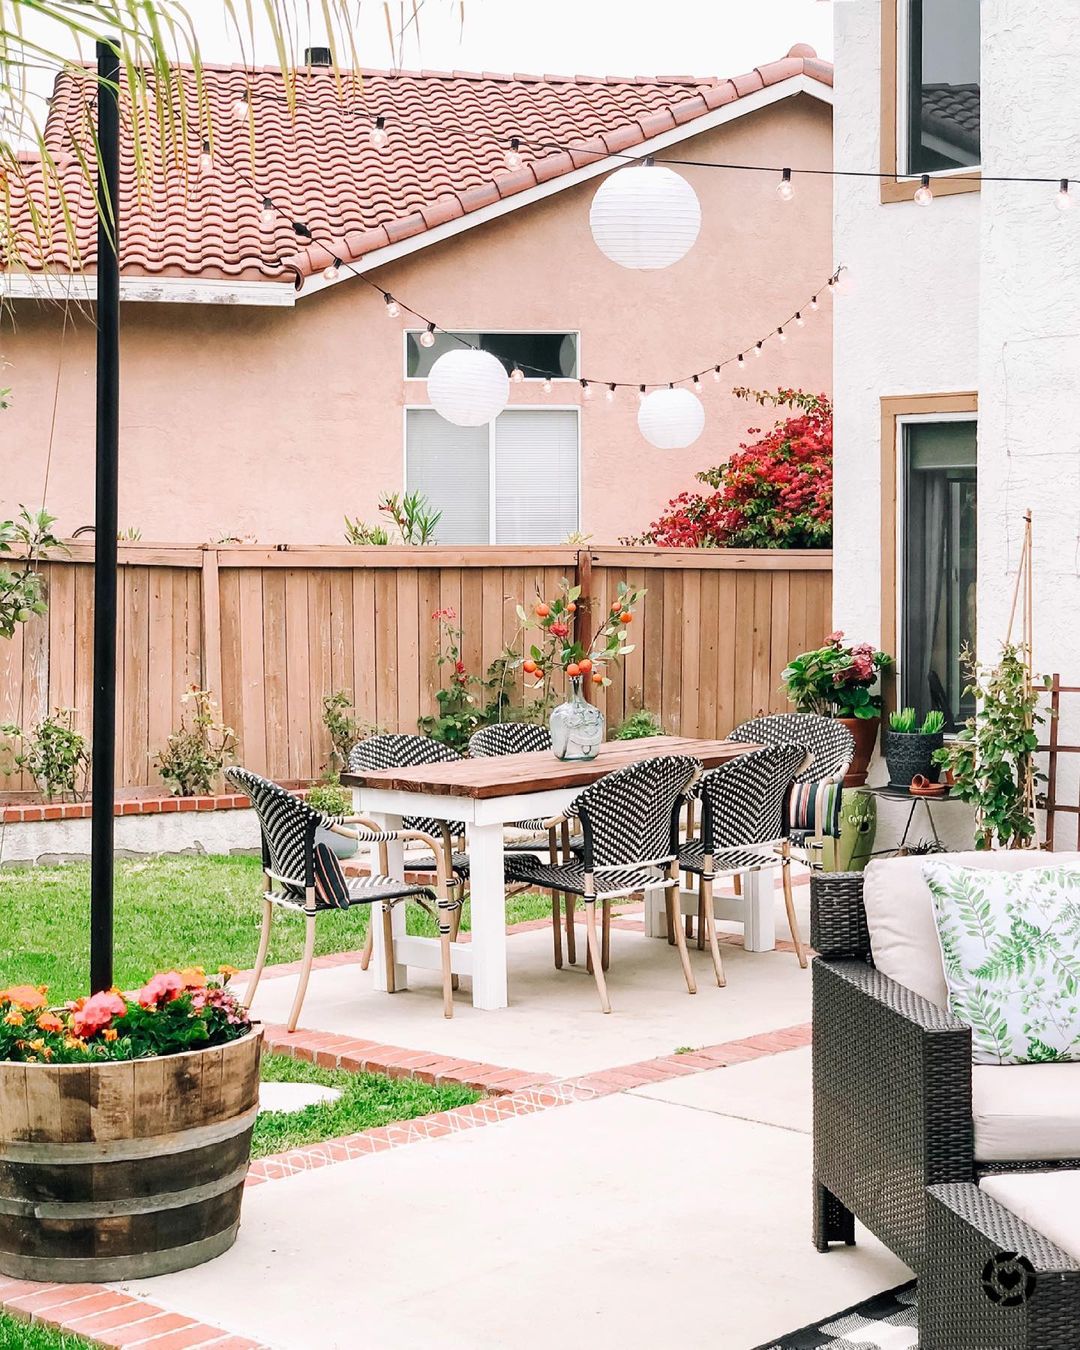 Backyard Patio Space with String Lights Hanging Over a Dining Table. Photo by Instagram user @fiddleleafinteriors